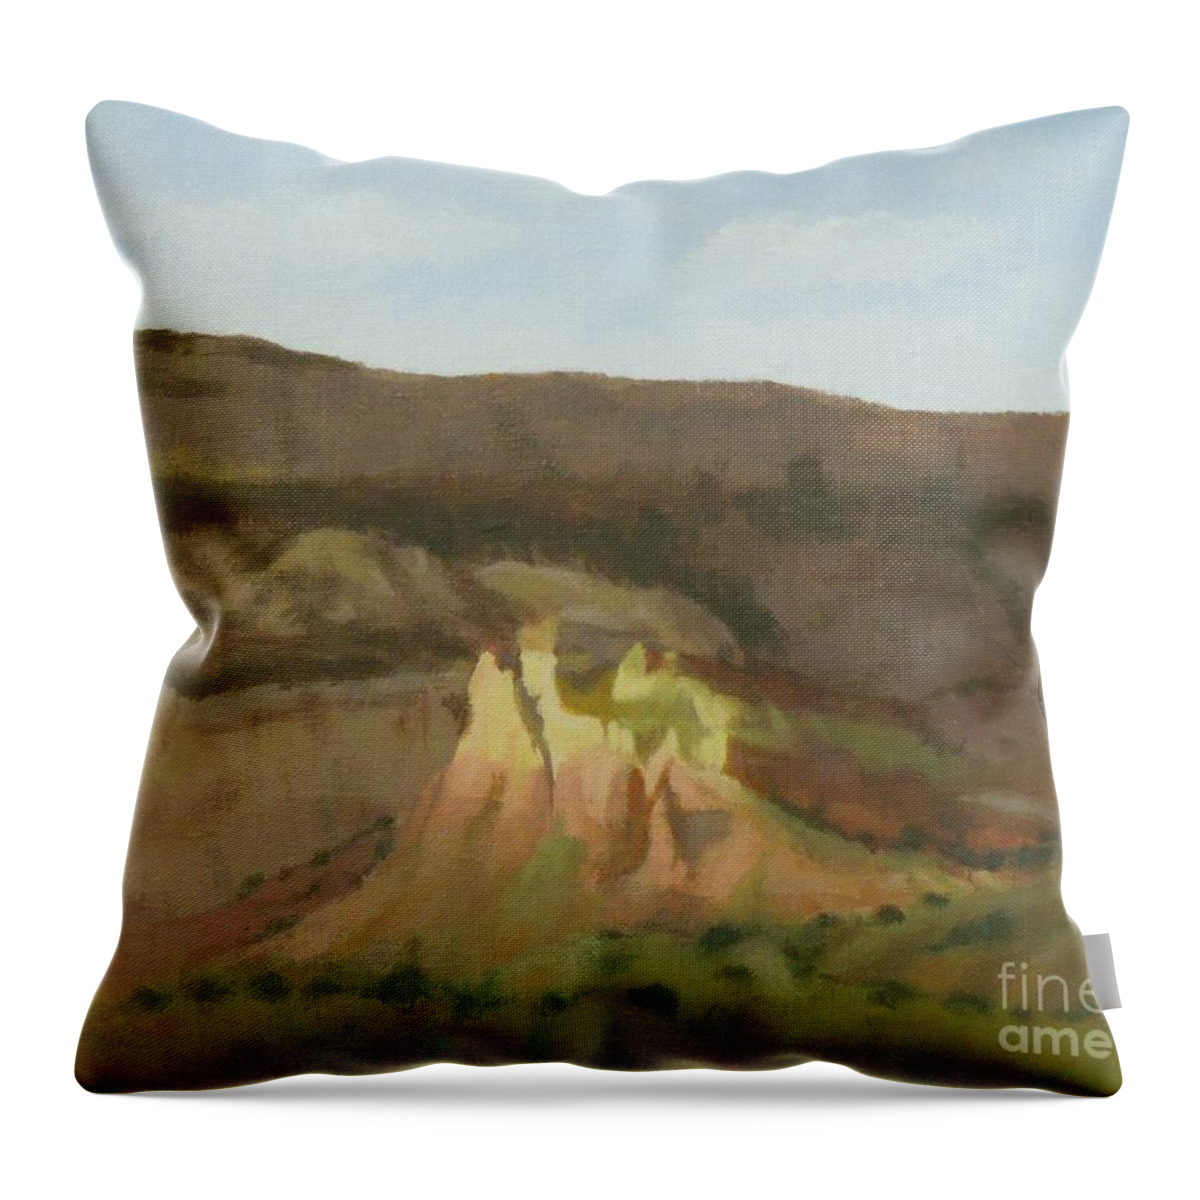 Northern New Mexico Throw Pillow featuring the painting New Mexican Statues by Phyllis Andrews